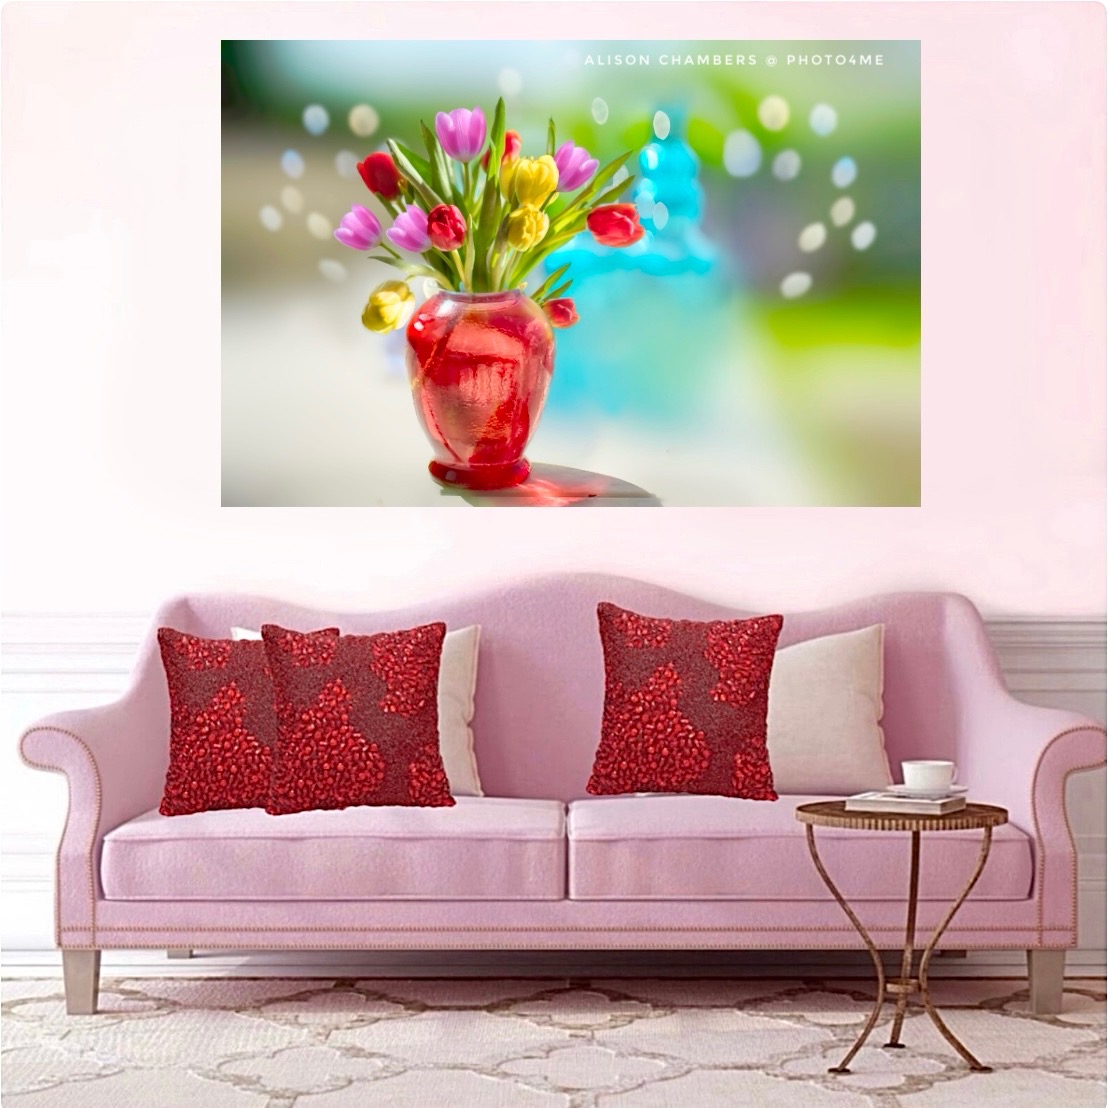 Tulips©️. Available from; shop.photo4me.com/1317727 & alisonchambers2.redbubble.com & 2-alison-chambers.pixels.com #tulips #tulipseason #WallArtDecor #flowerphotography #flowerprint #eastergifts #motherdaygift #springflowers #spring #thejoyofspring